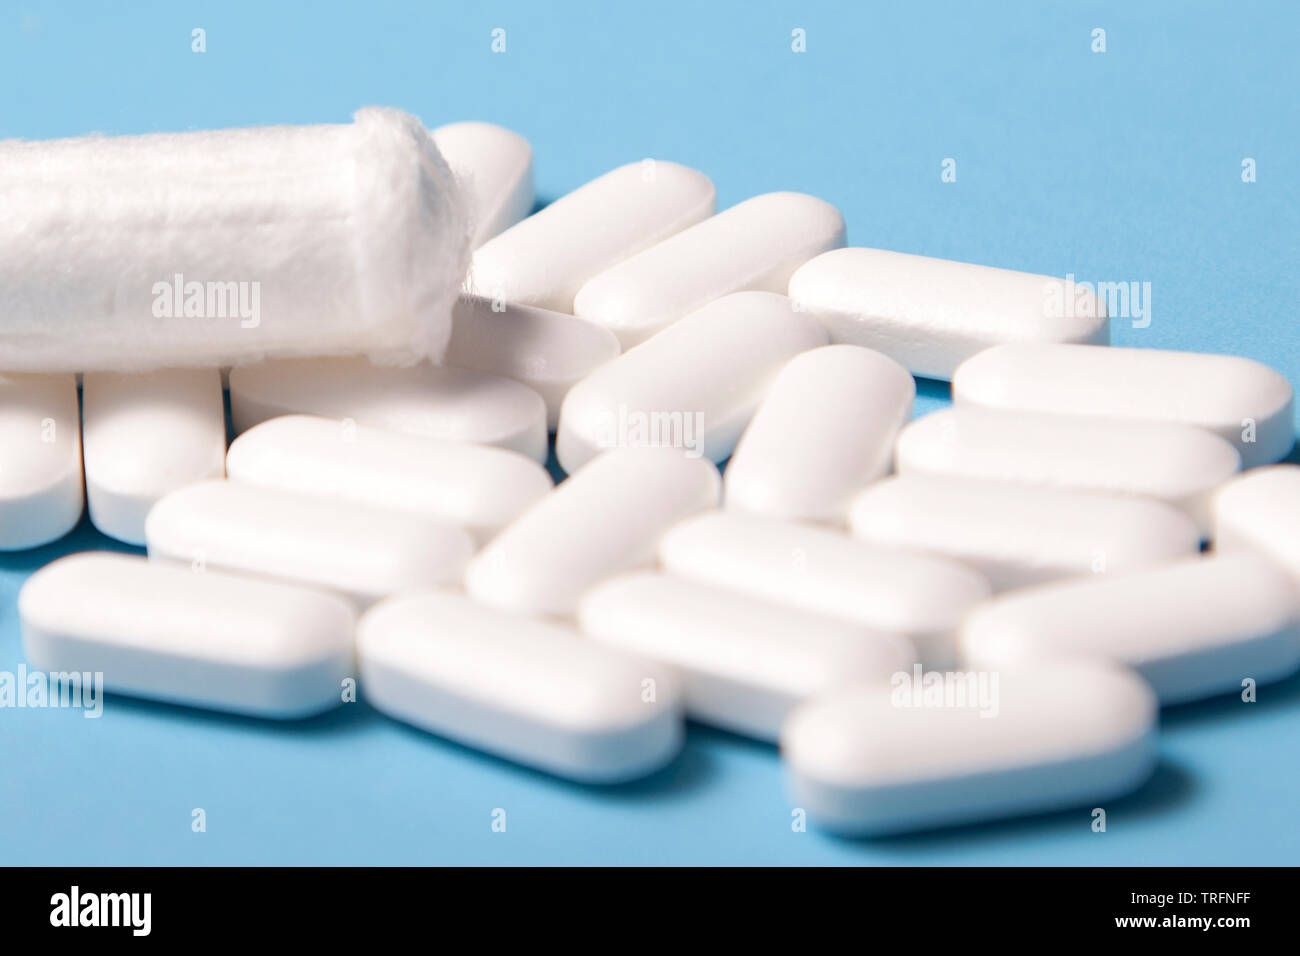 Period or PMS is coming, with a collection of medication and a tampon  against a blue background Stock Photo - Alamy